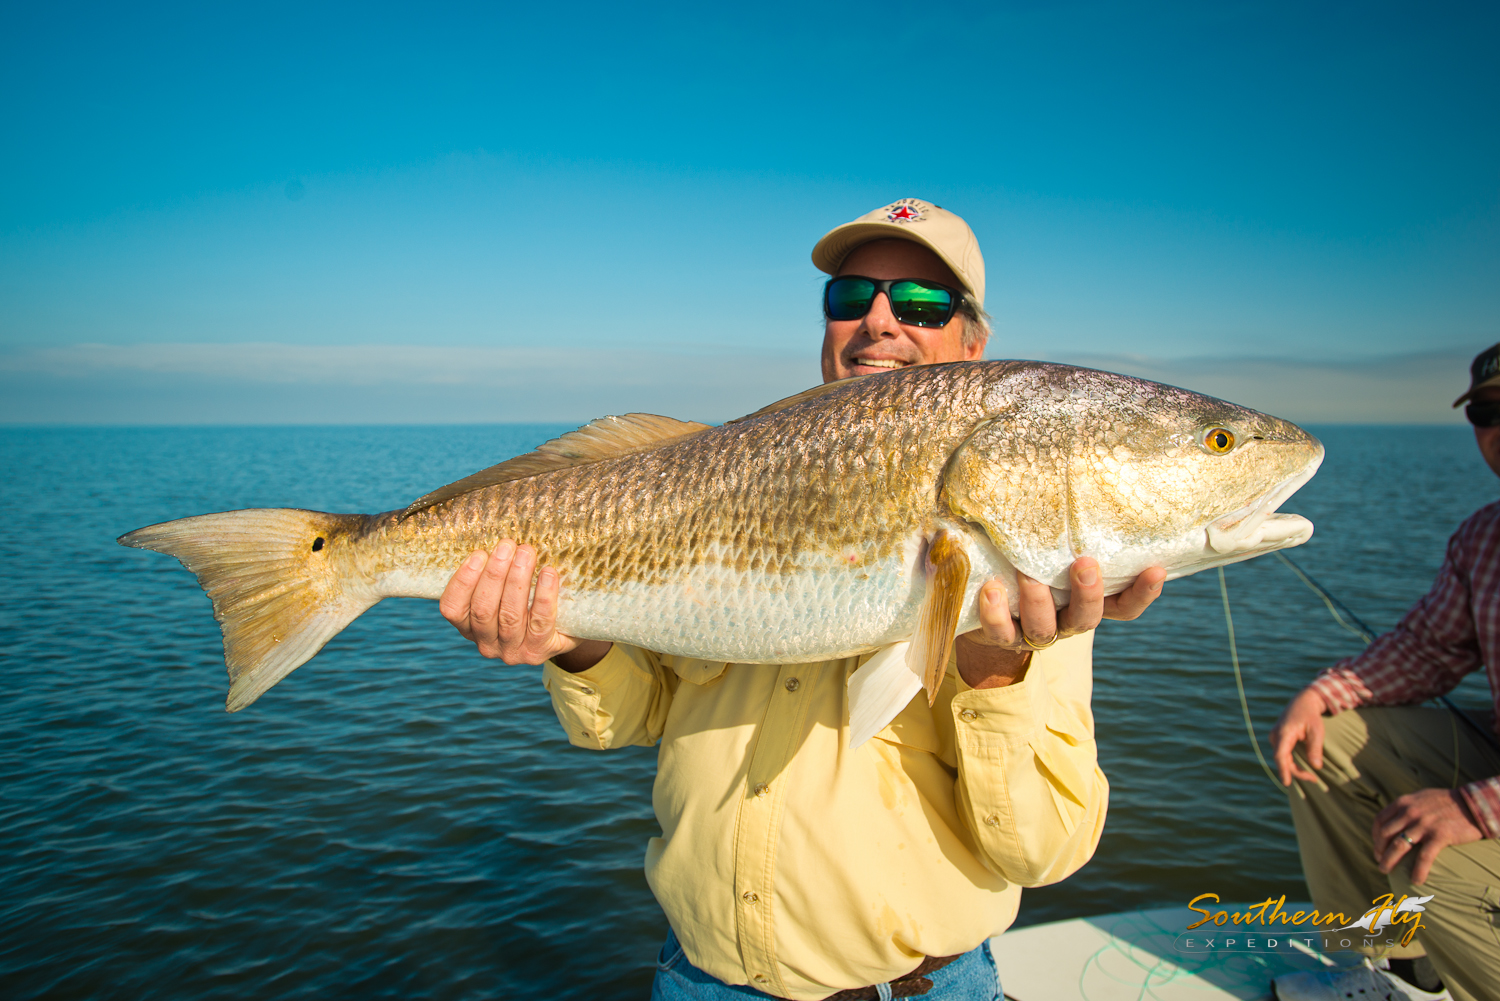 Book Light Tackle Fly Fishing Trips Now with Southern Fly Expeditions